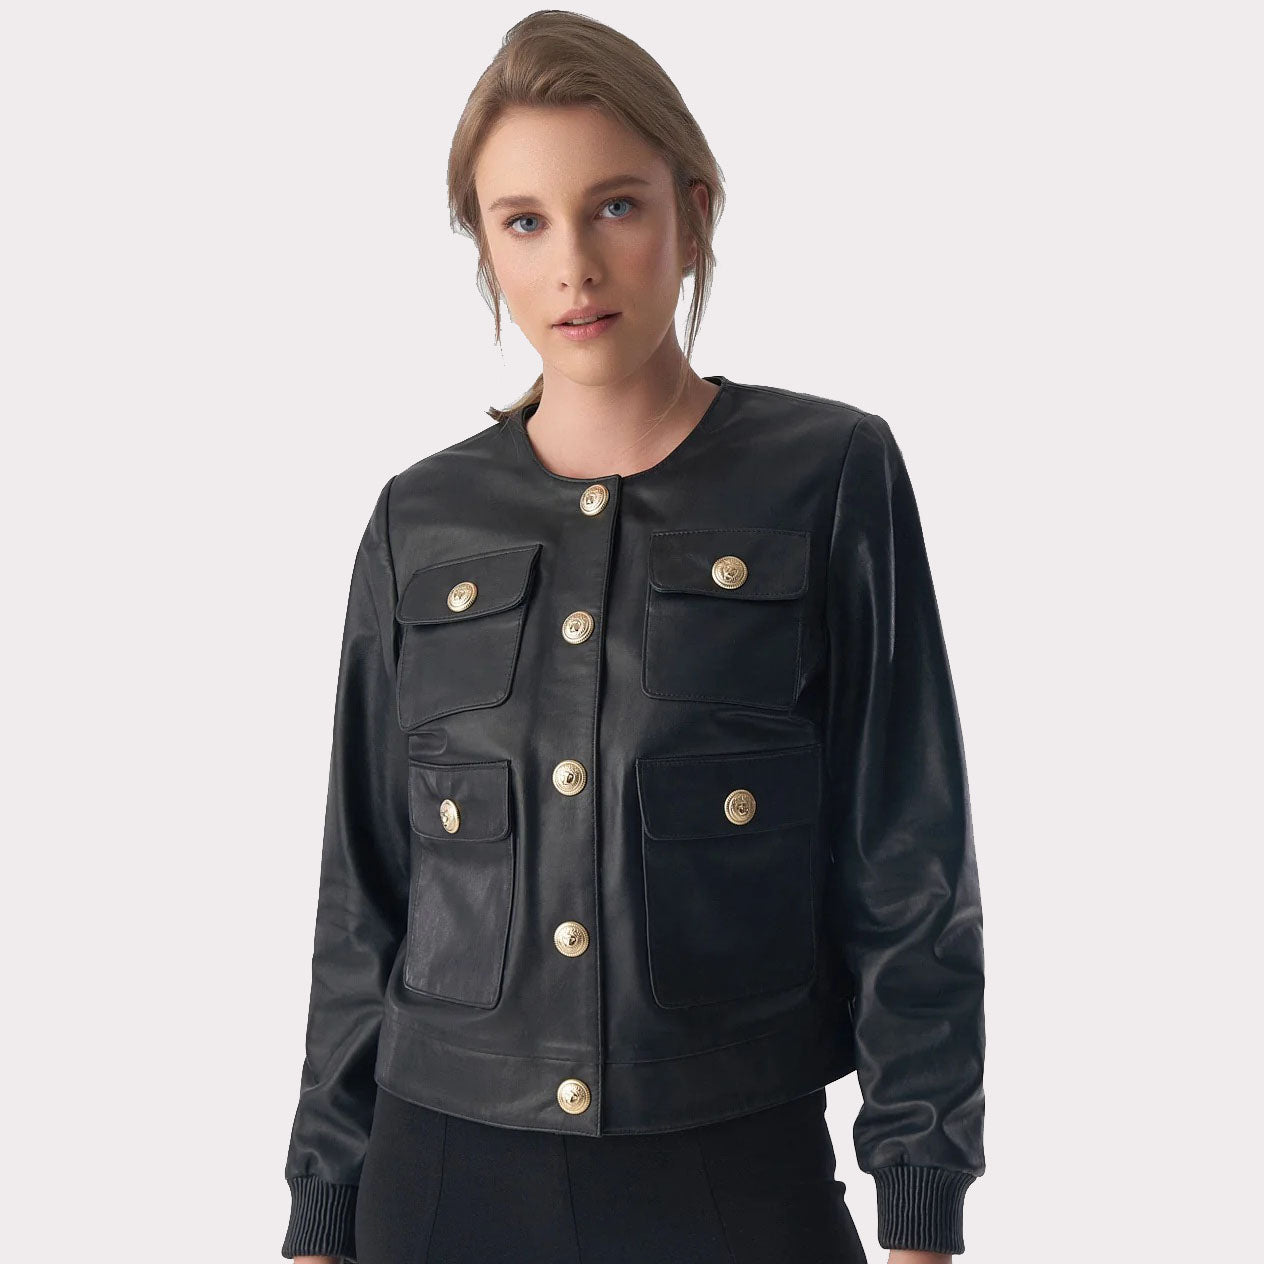 Chic Studded Black Leather Jacket for Women